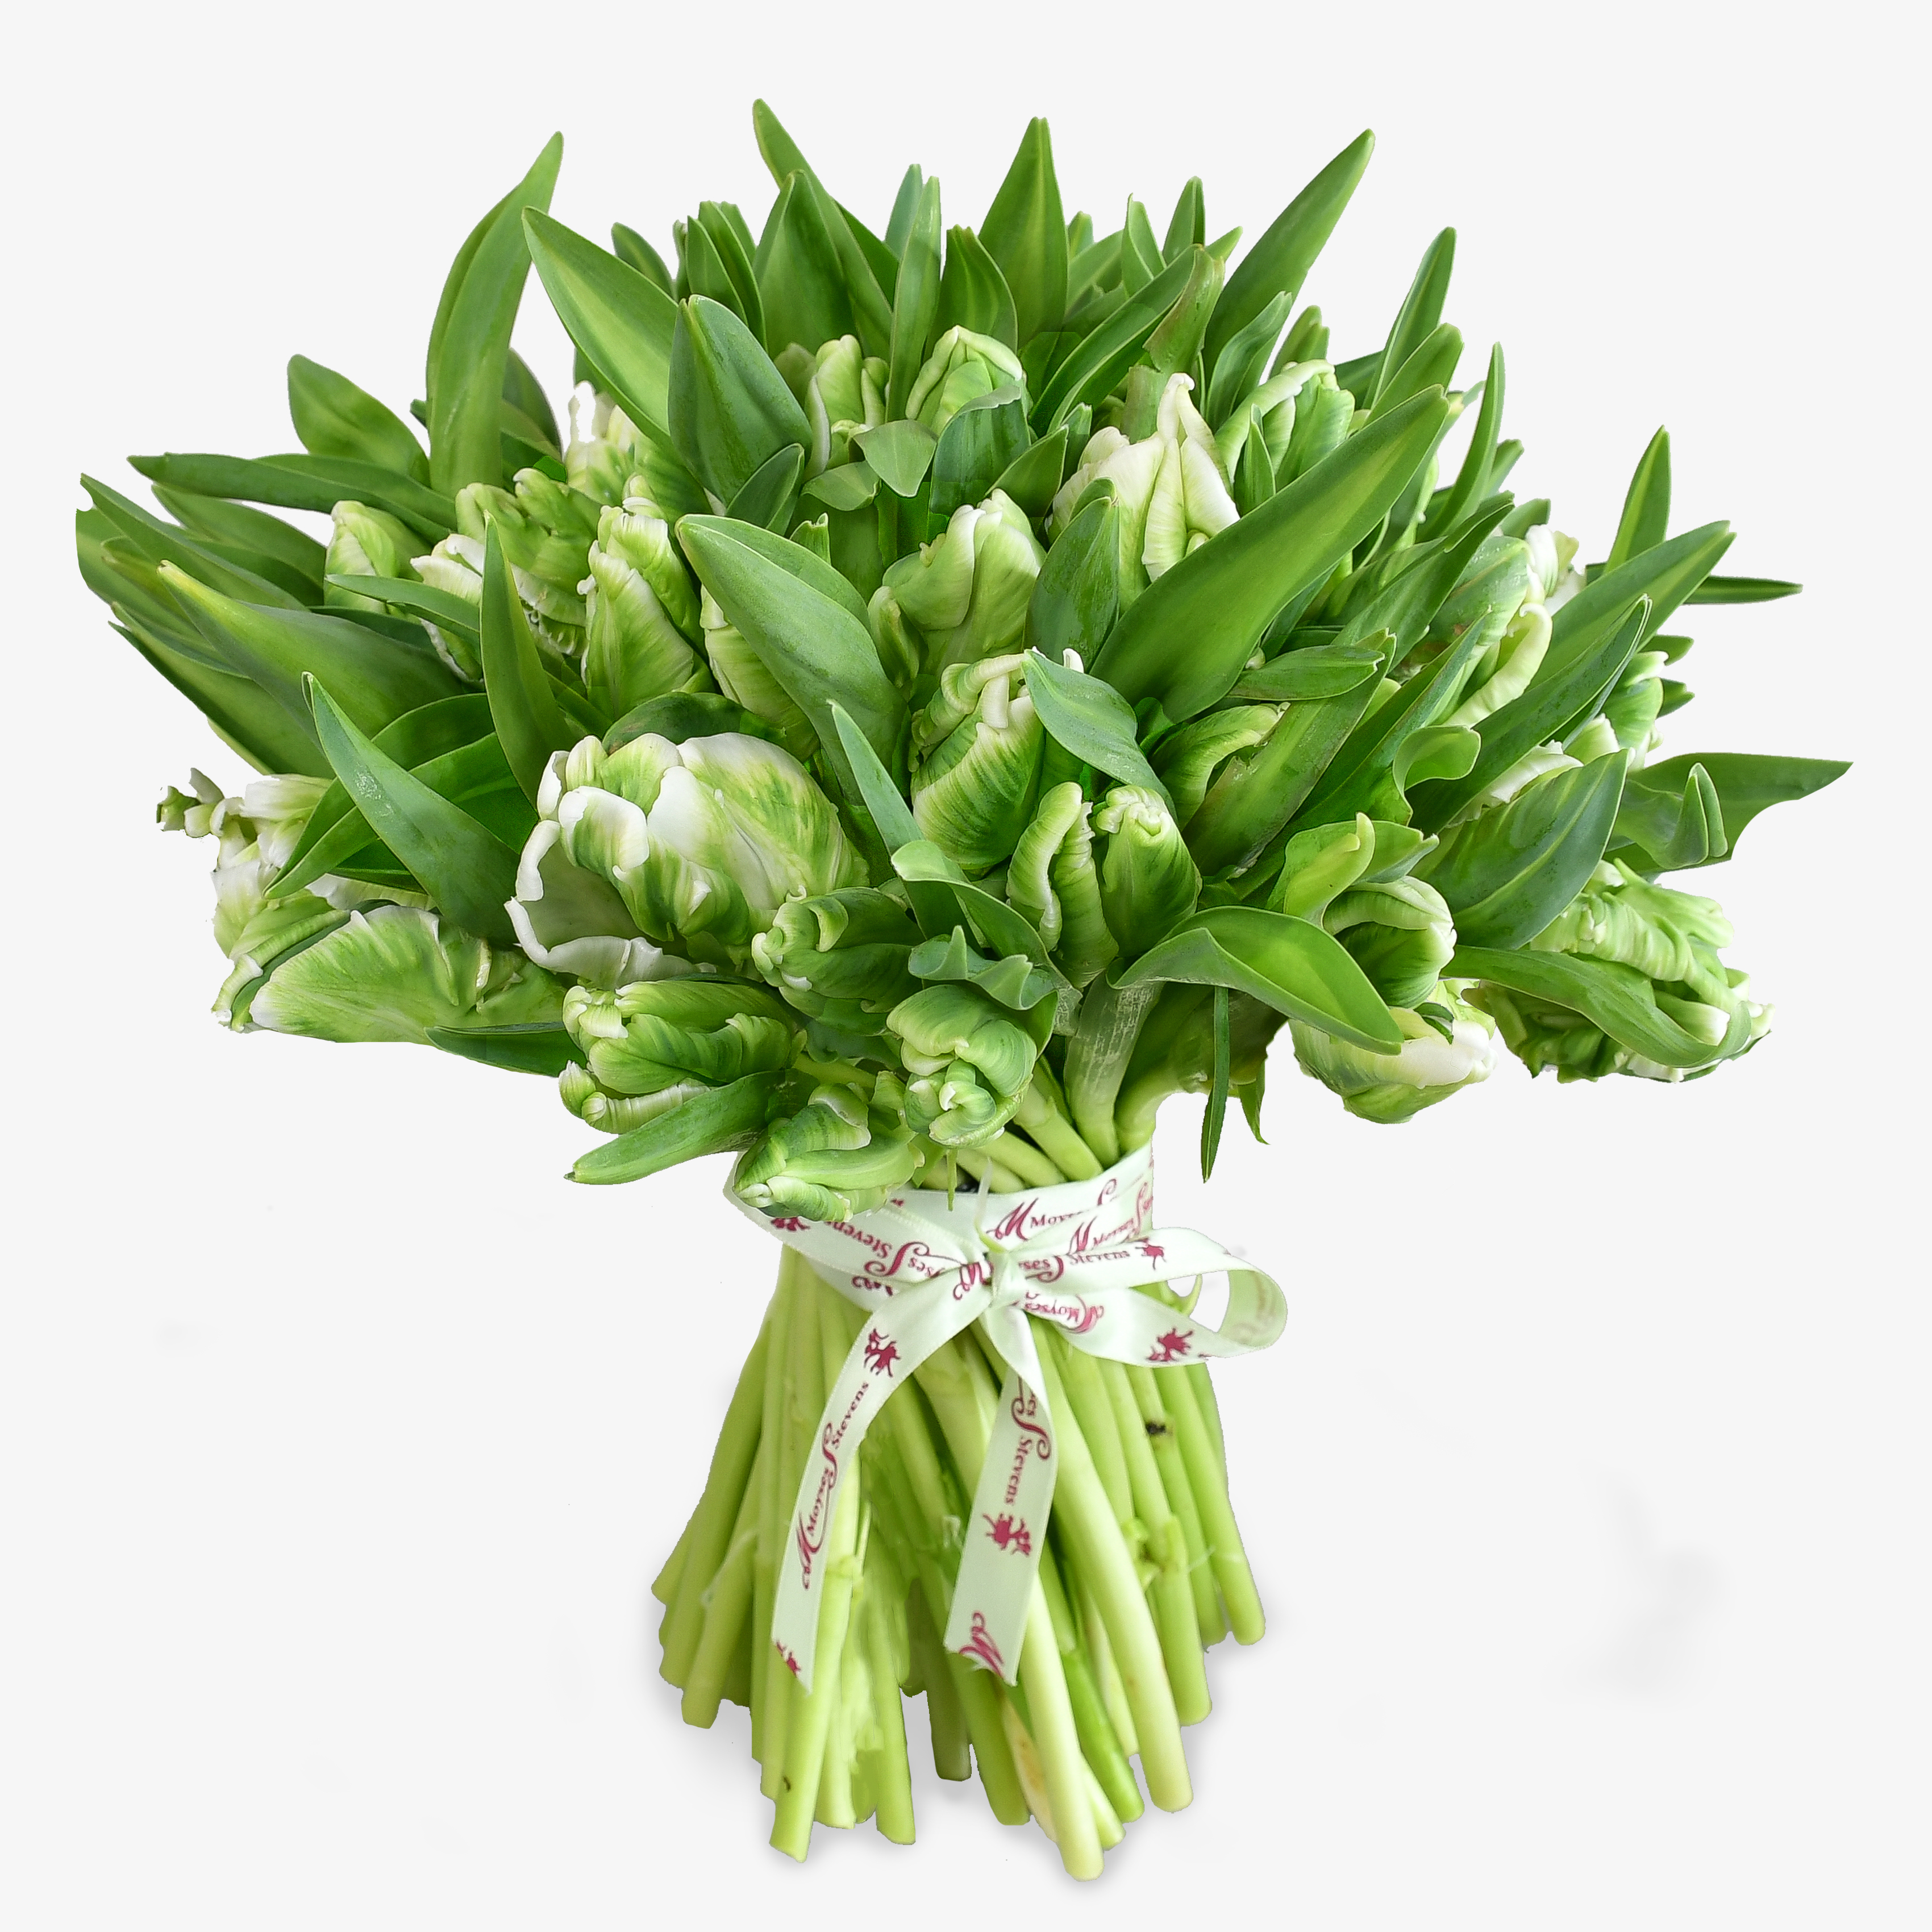 Parrot Tulips image